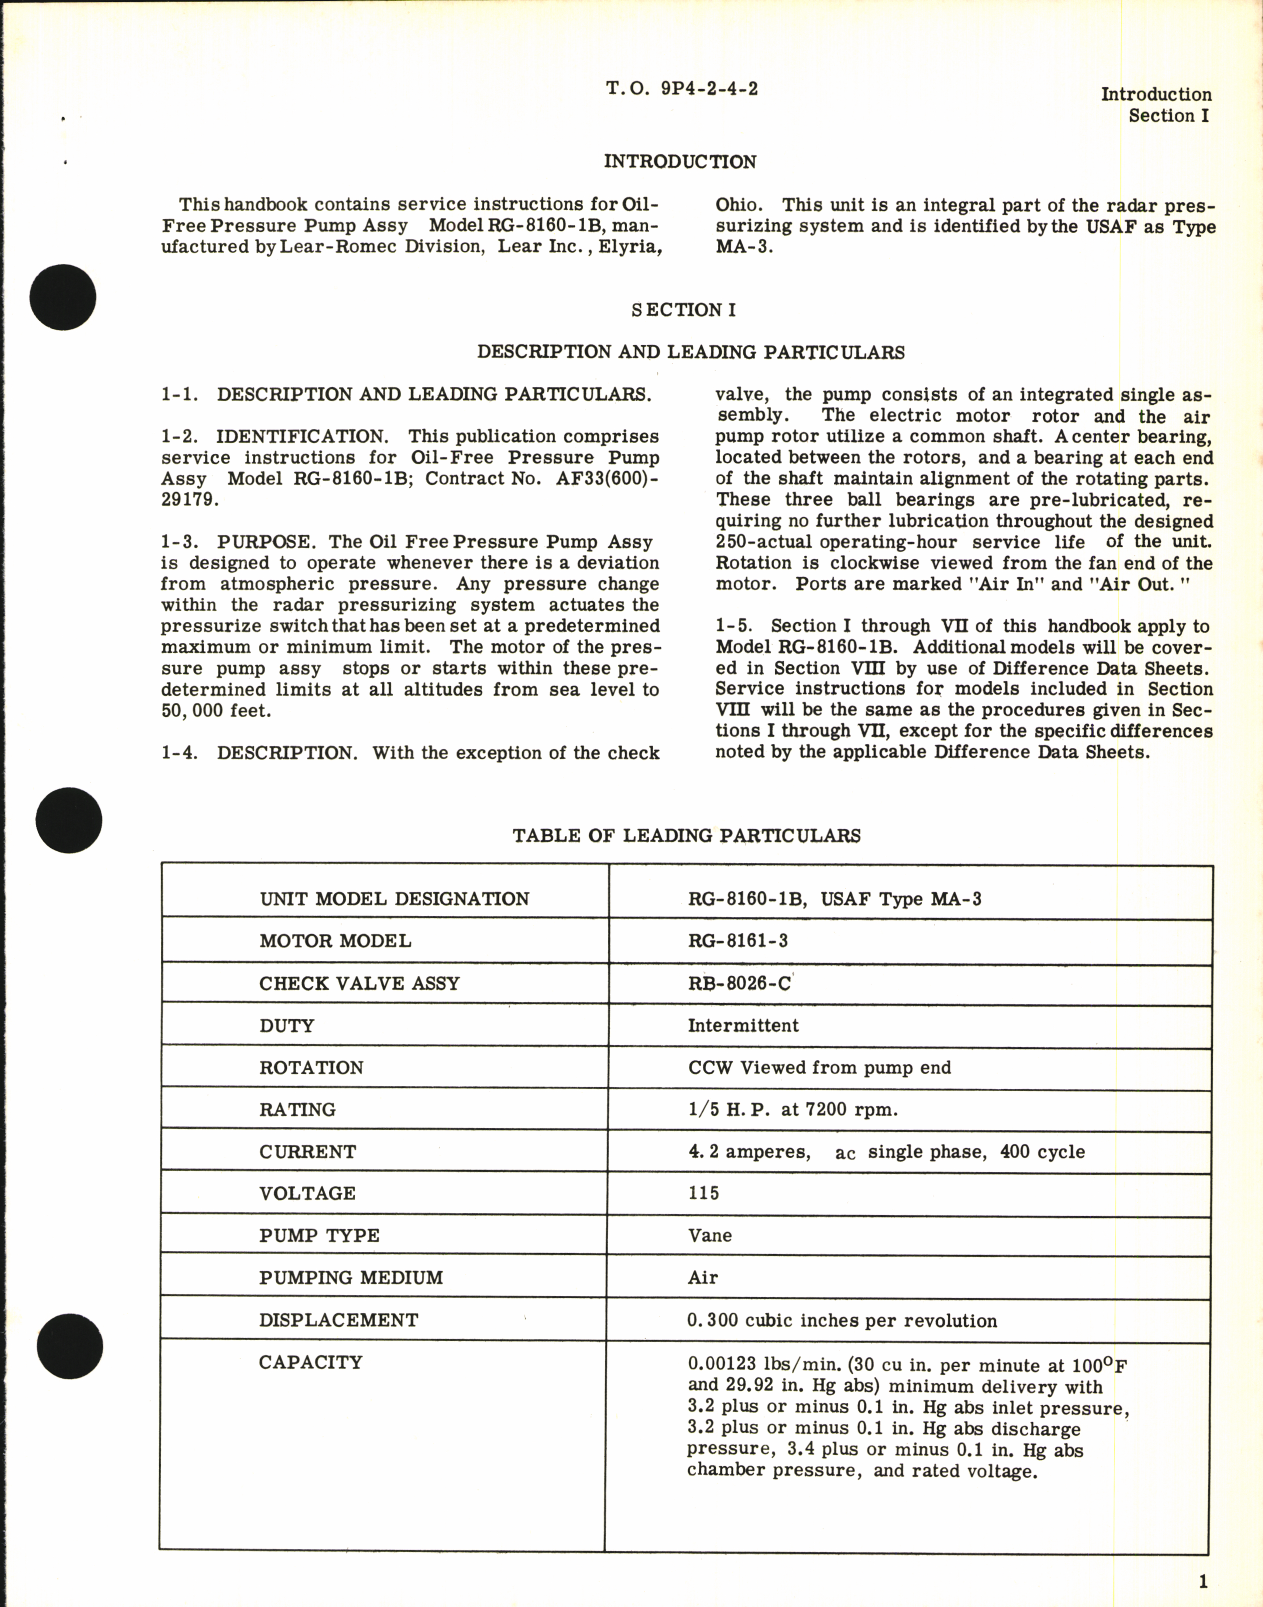 Sample page 5 from AirCorps Library document: Handbook of Service Instructions for Oil-Free Air Pressure Pump Model RG-8160-1B